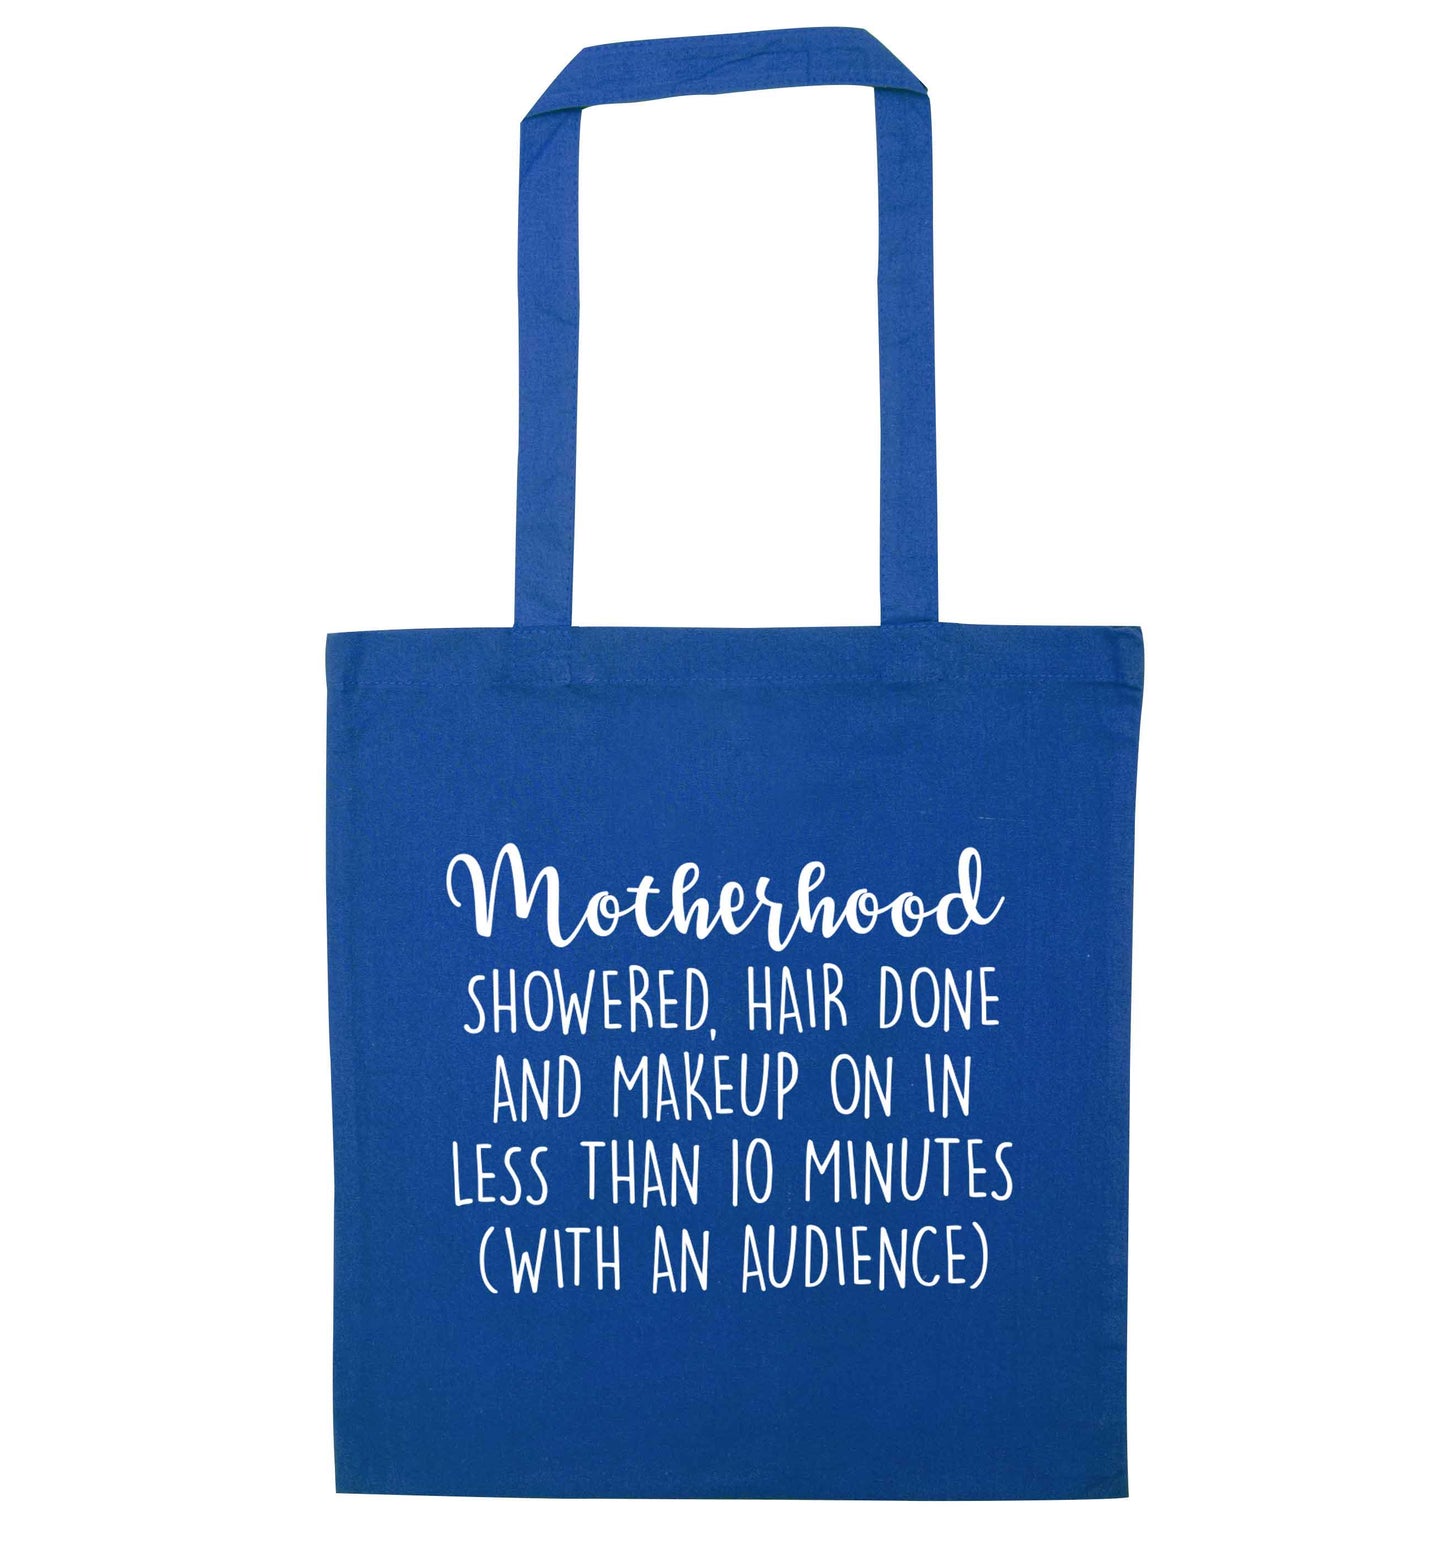 Motherhood, showered, hair done and makeup on blue tote bag